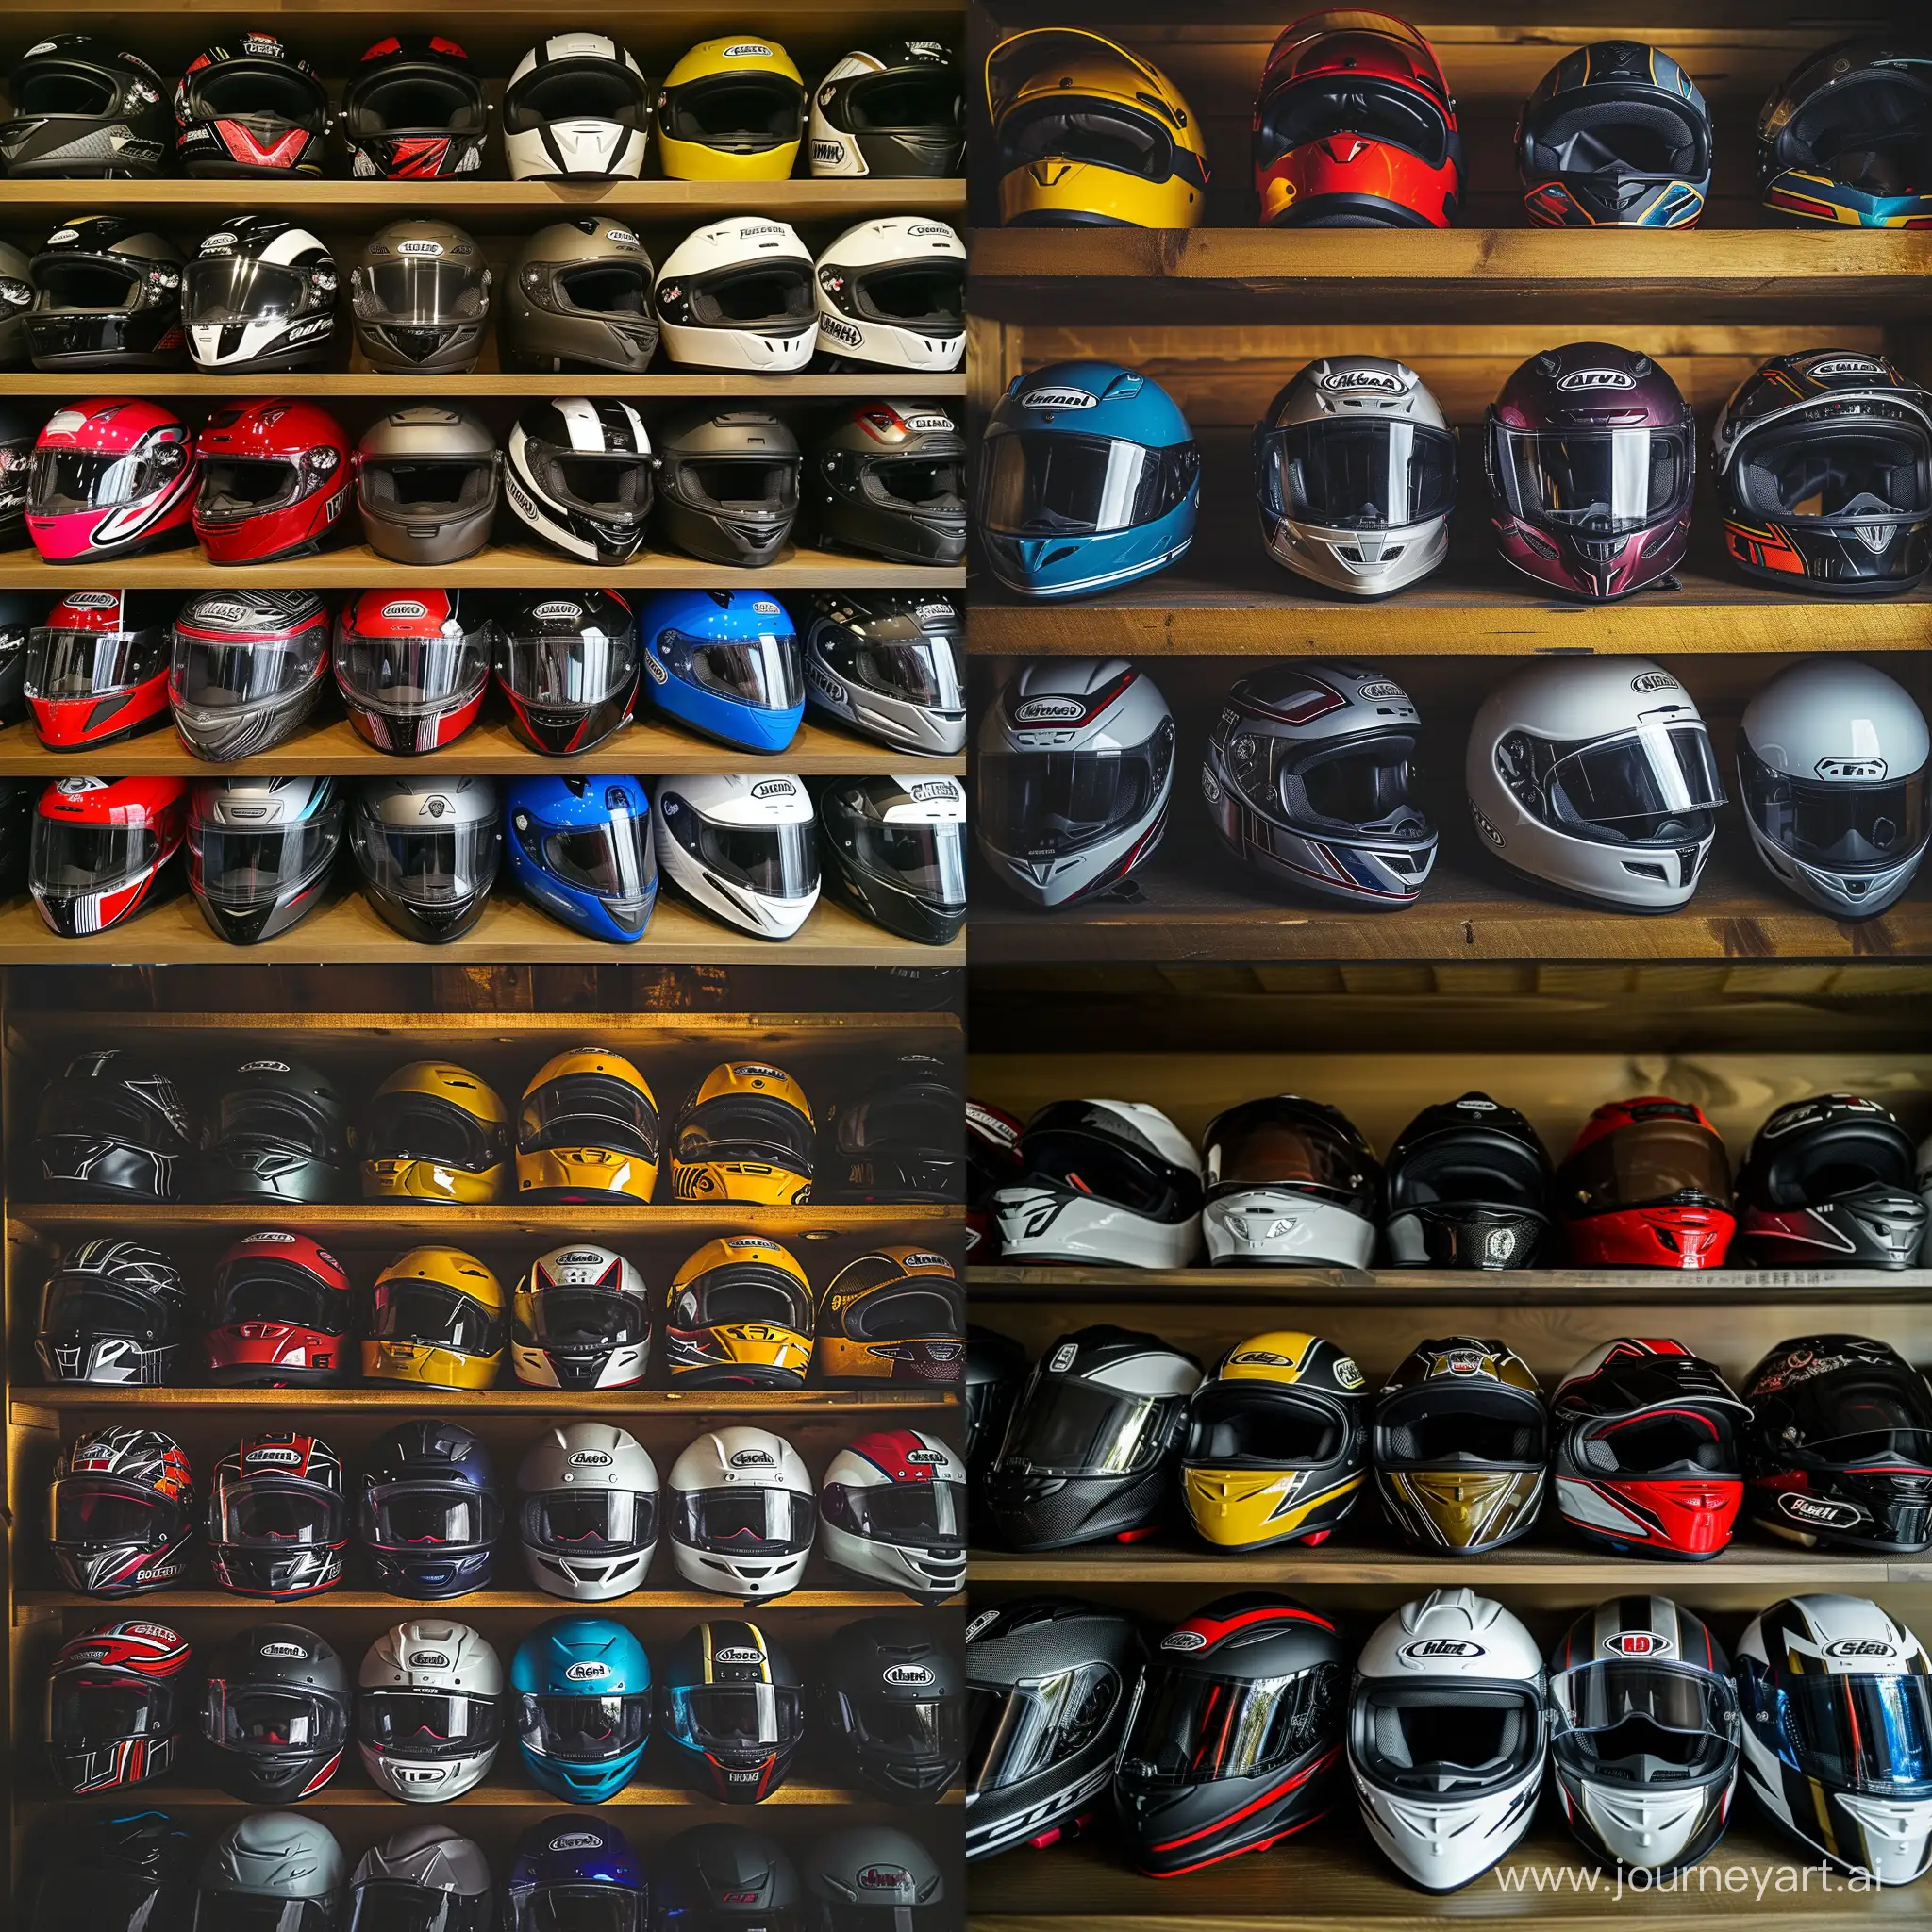 Diverse-Array-of-Motorcycle-Helmets-Displayed-in-Neat-LoftStyle-Arrangement